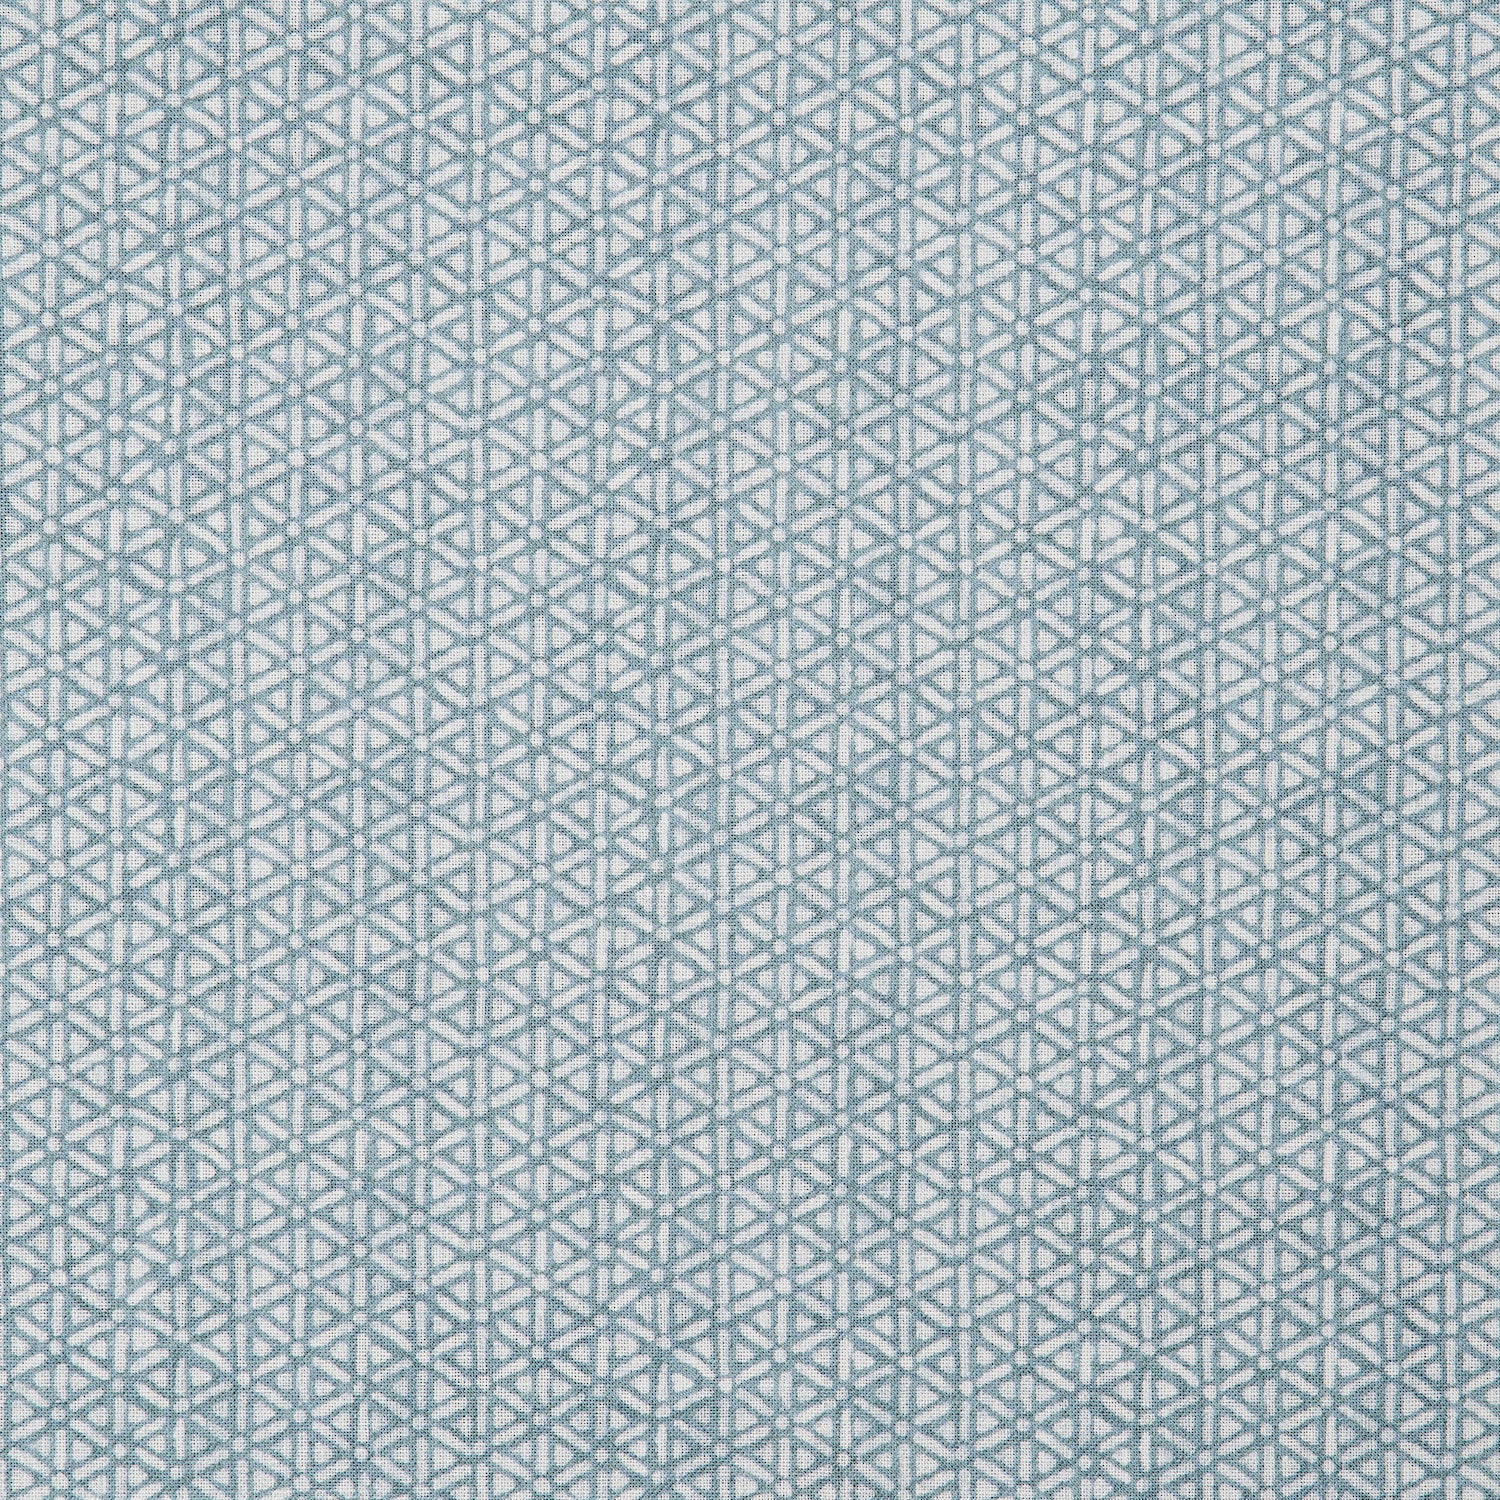 Detail of a linen fabric in a detailed geometric pattern in white on a light blue field.